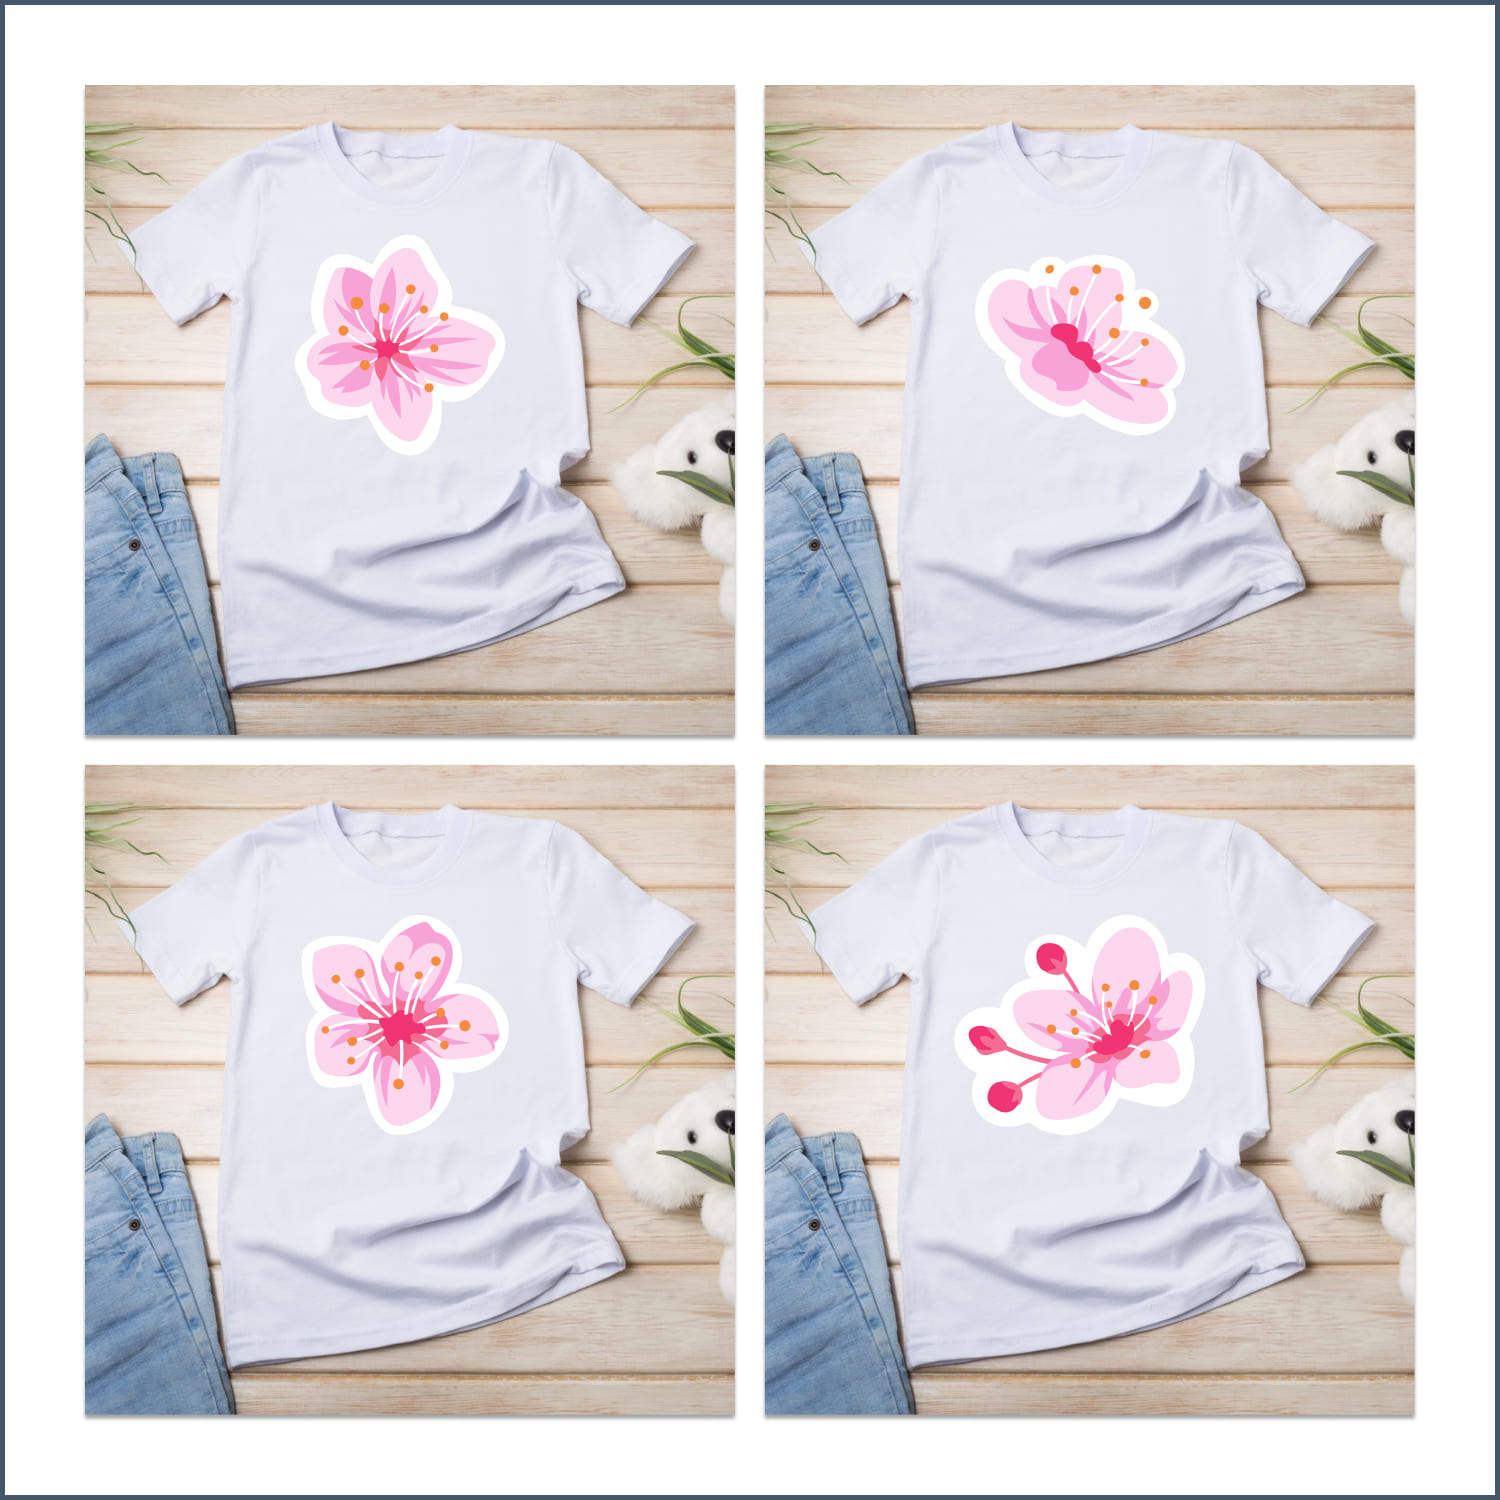 Images with cherry blossom flower on t-shirt designs.